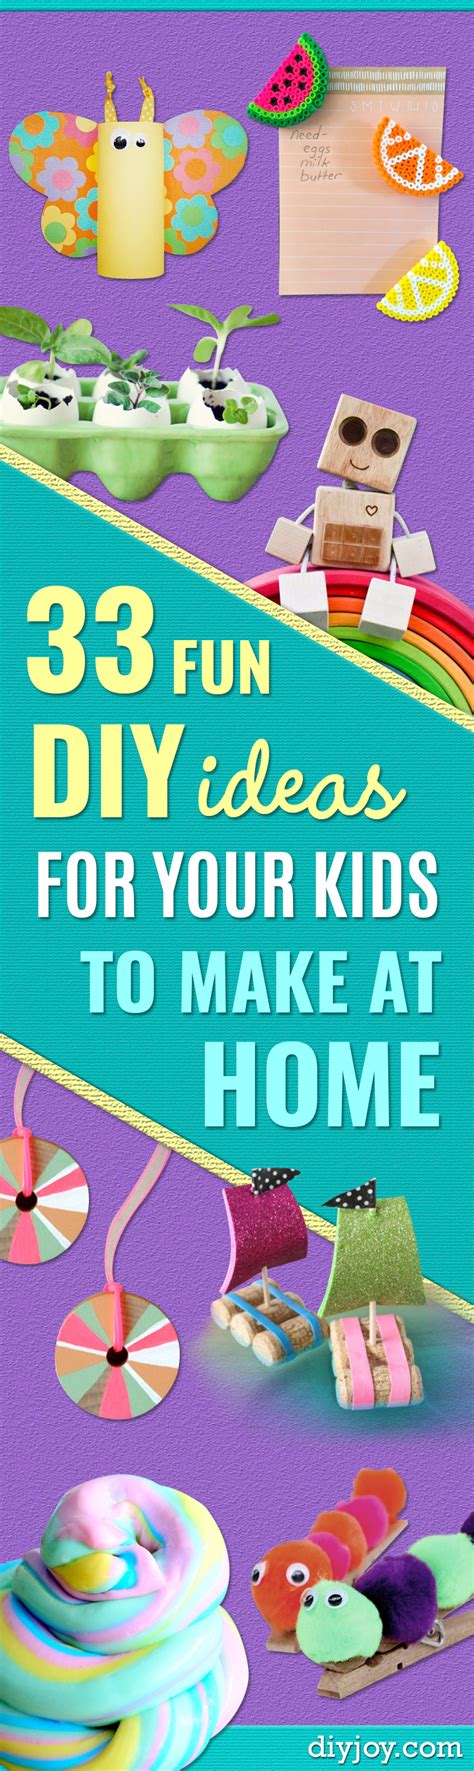 33 Fun Diy Ideas For Your Kids To Make At Home